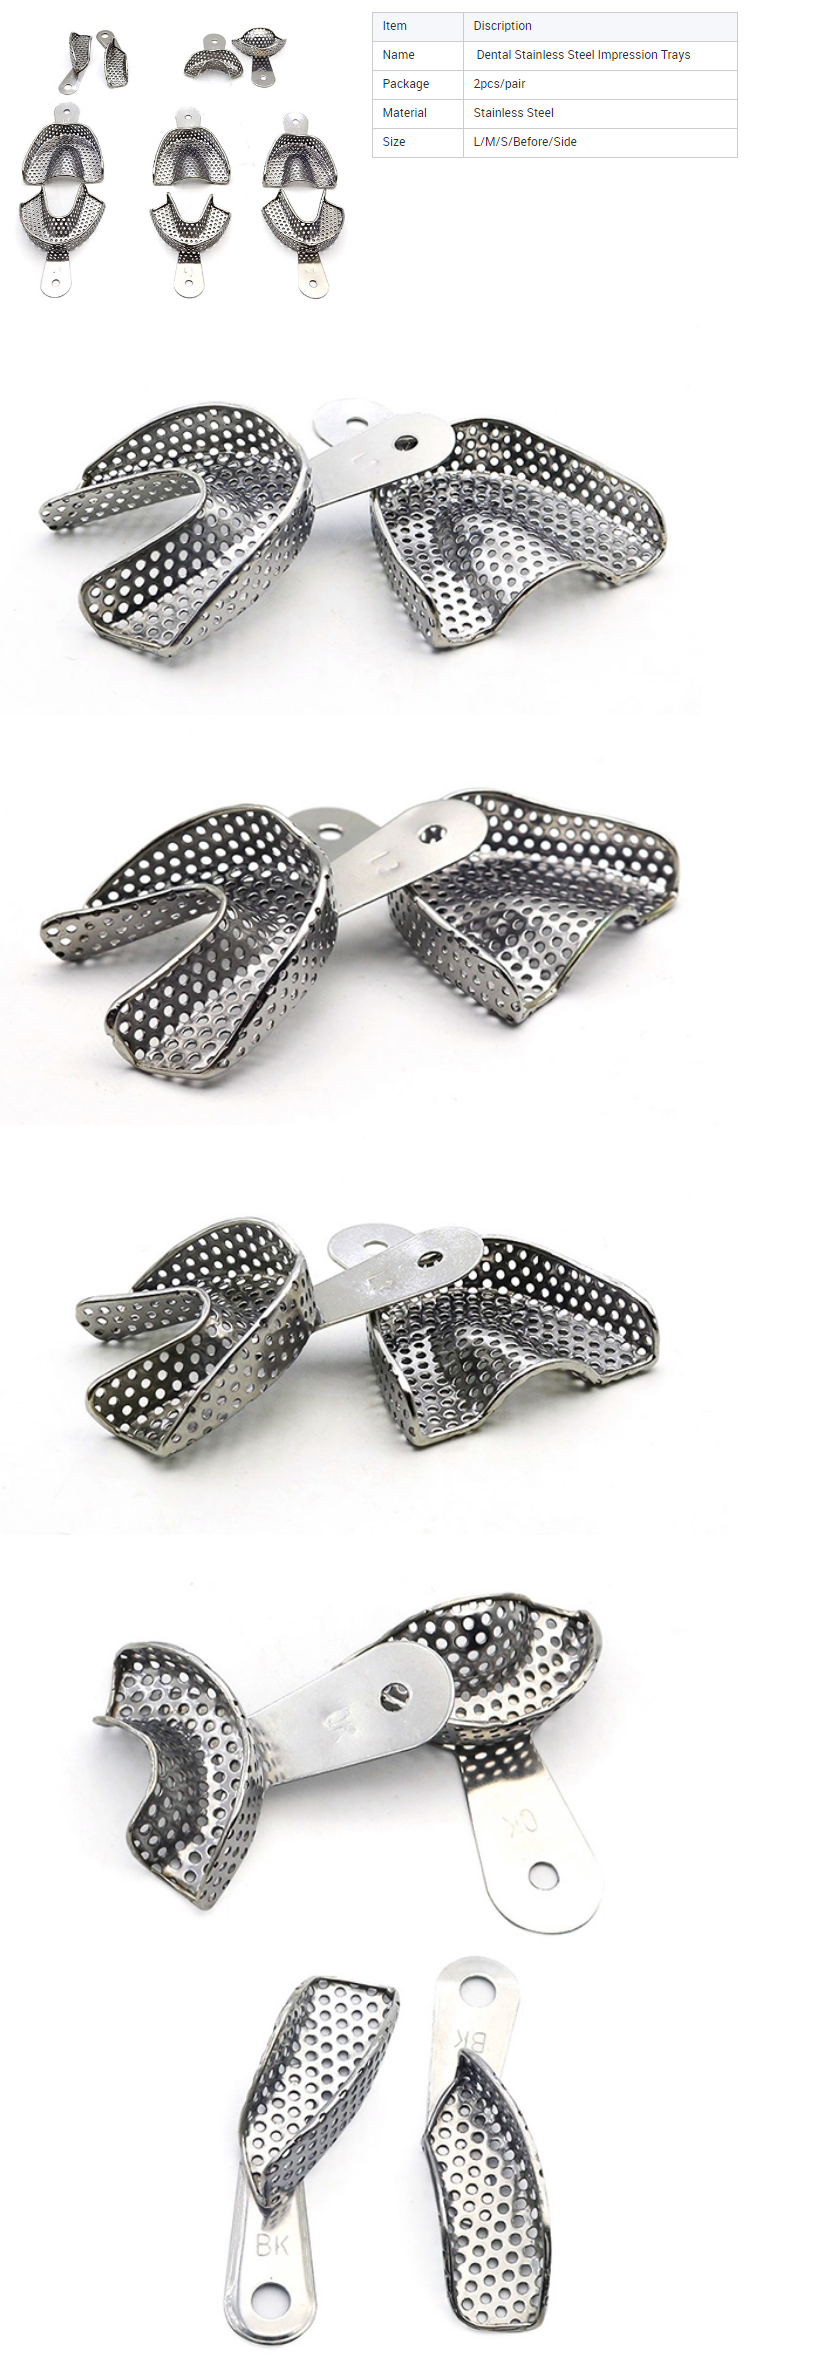 stainless dental lab impression tray kit for sale online